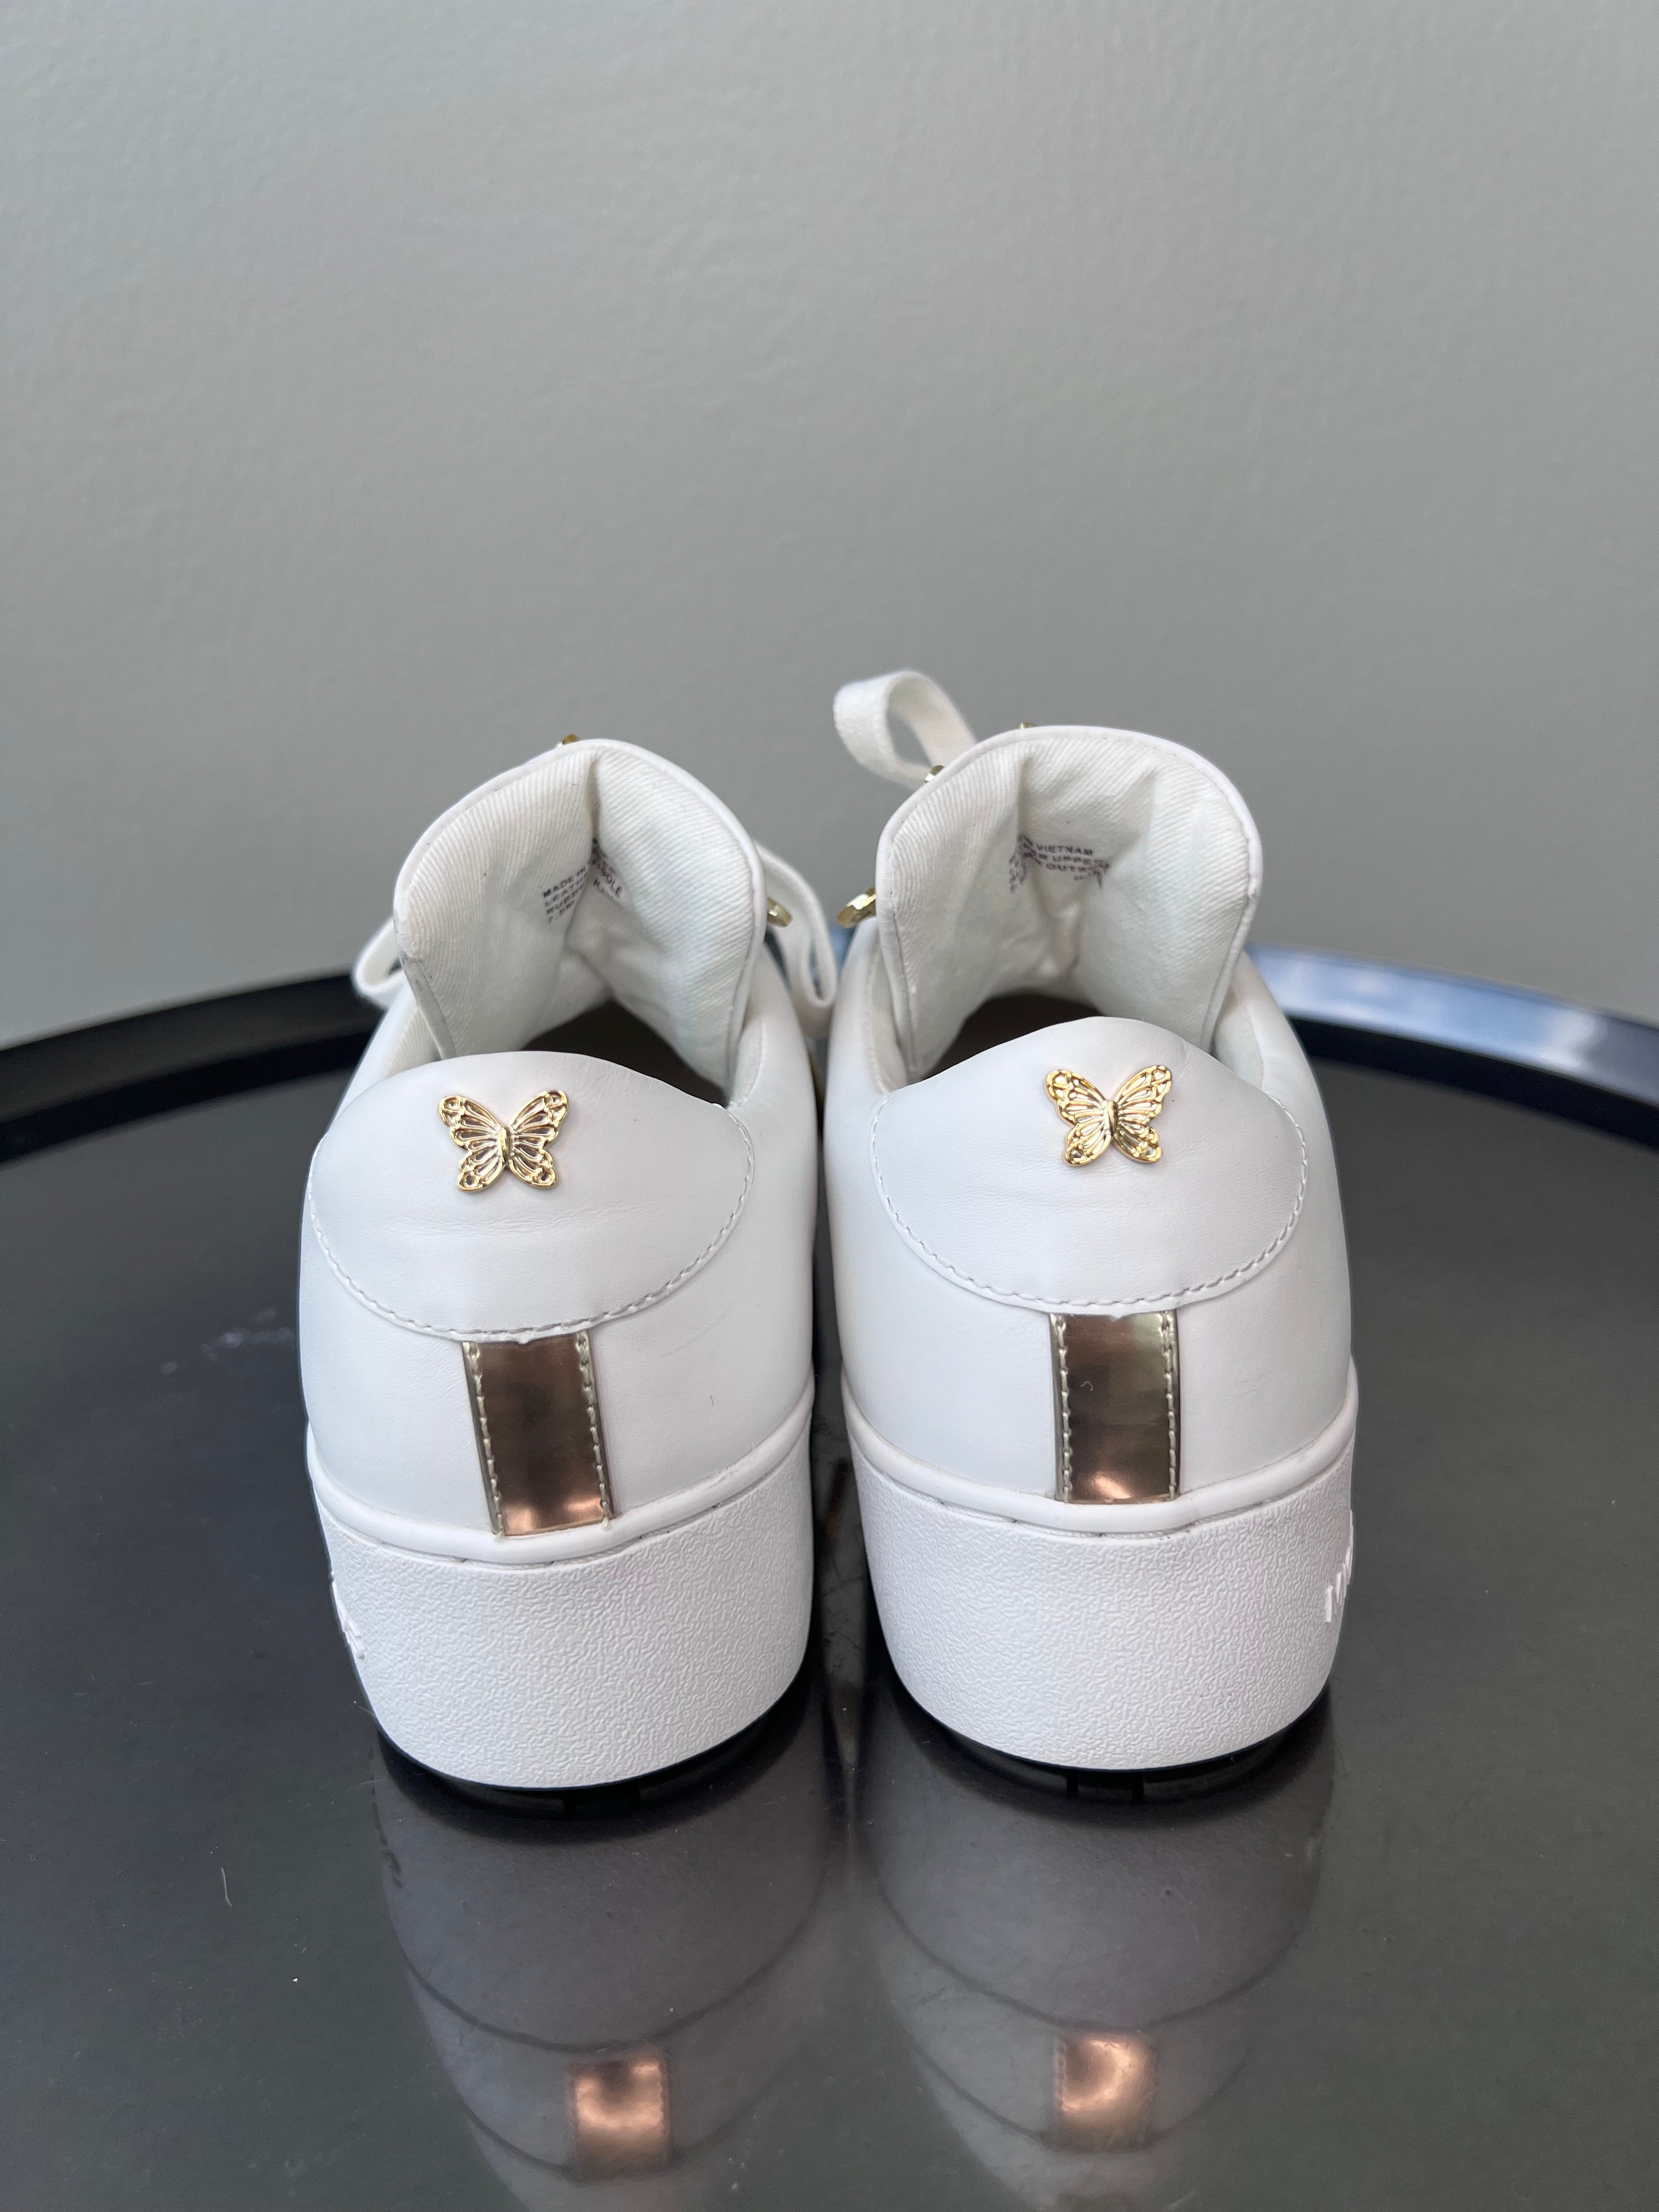 White sneakers with gold butterflies on the tongue - MICHAEL KORS